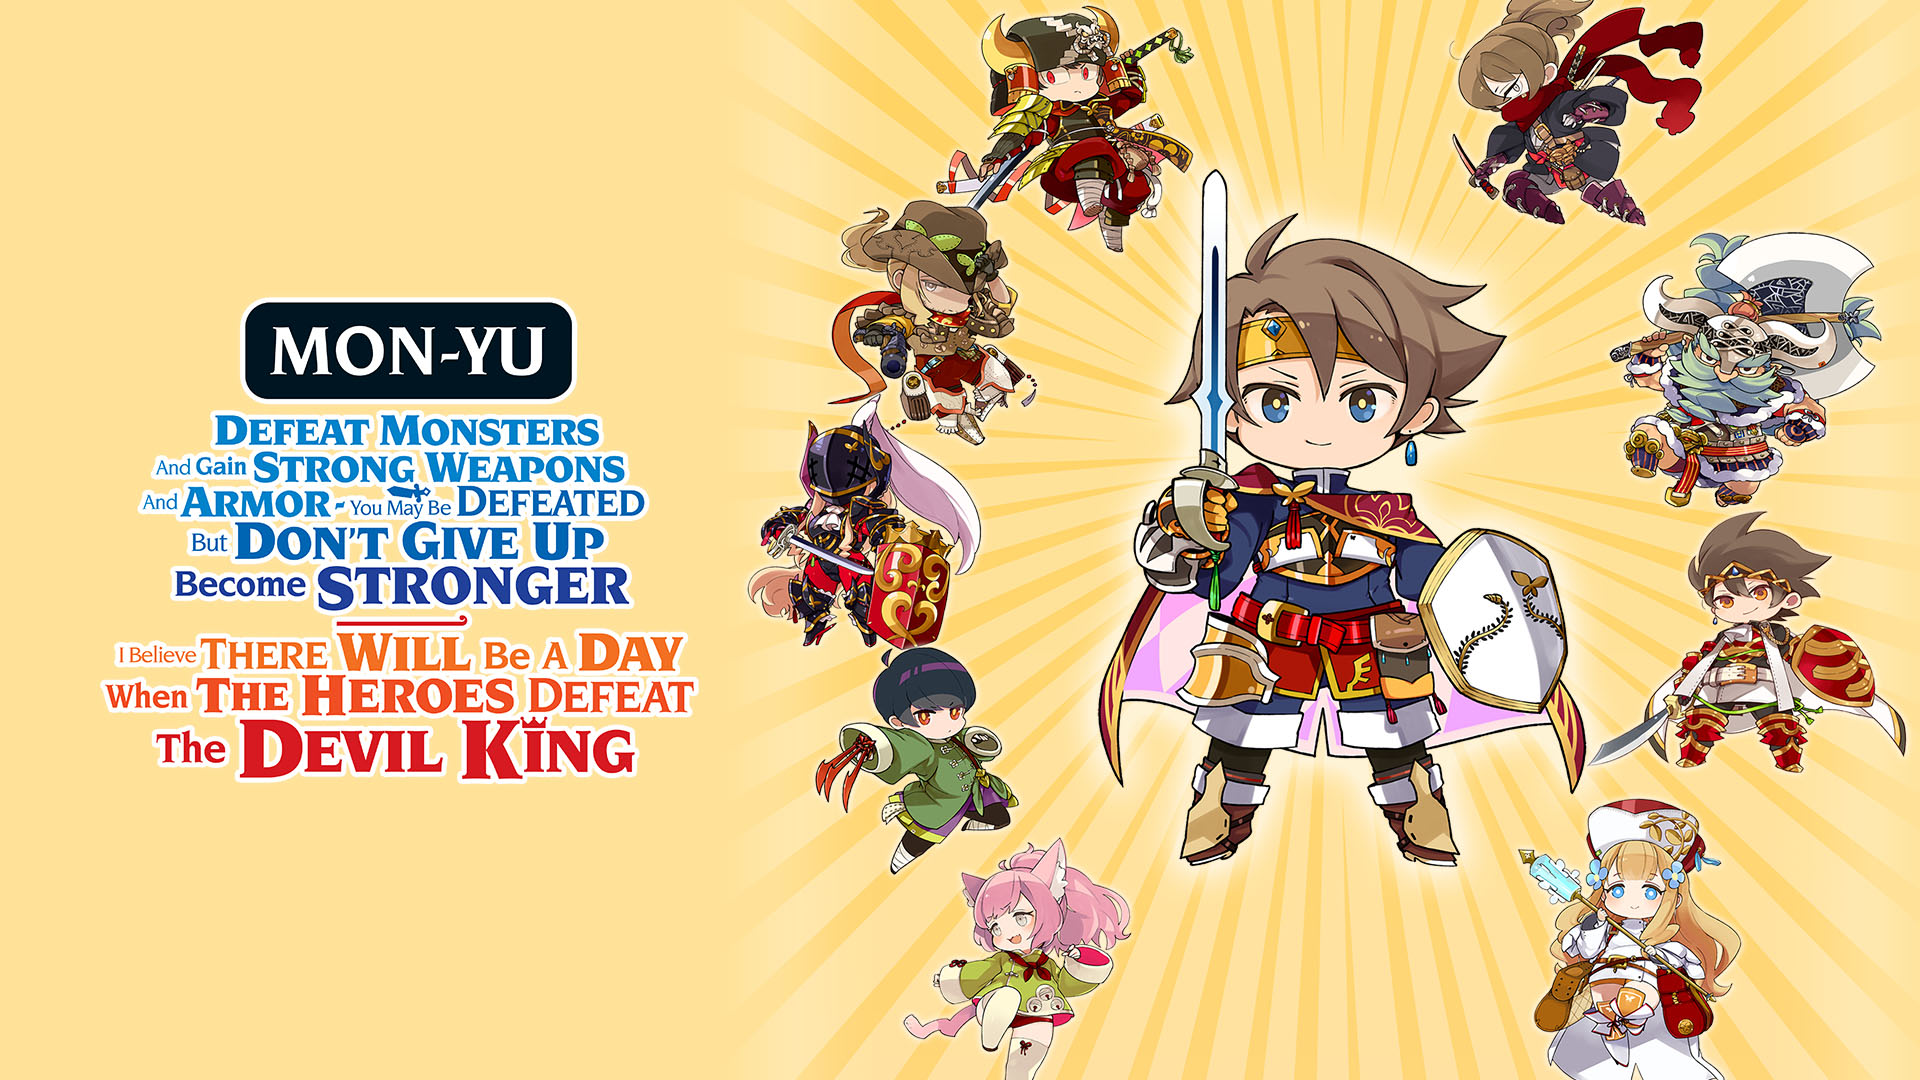 Mon-Yu: Defeat Monsters And Gain Strong Weapons And Armor. You May Be Defeated, But Don’t Give Up. Become Stronger. I Believe There Will Be A Day When The Heroes Defeat The Devil King. 1